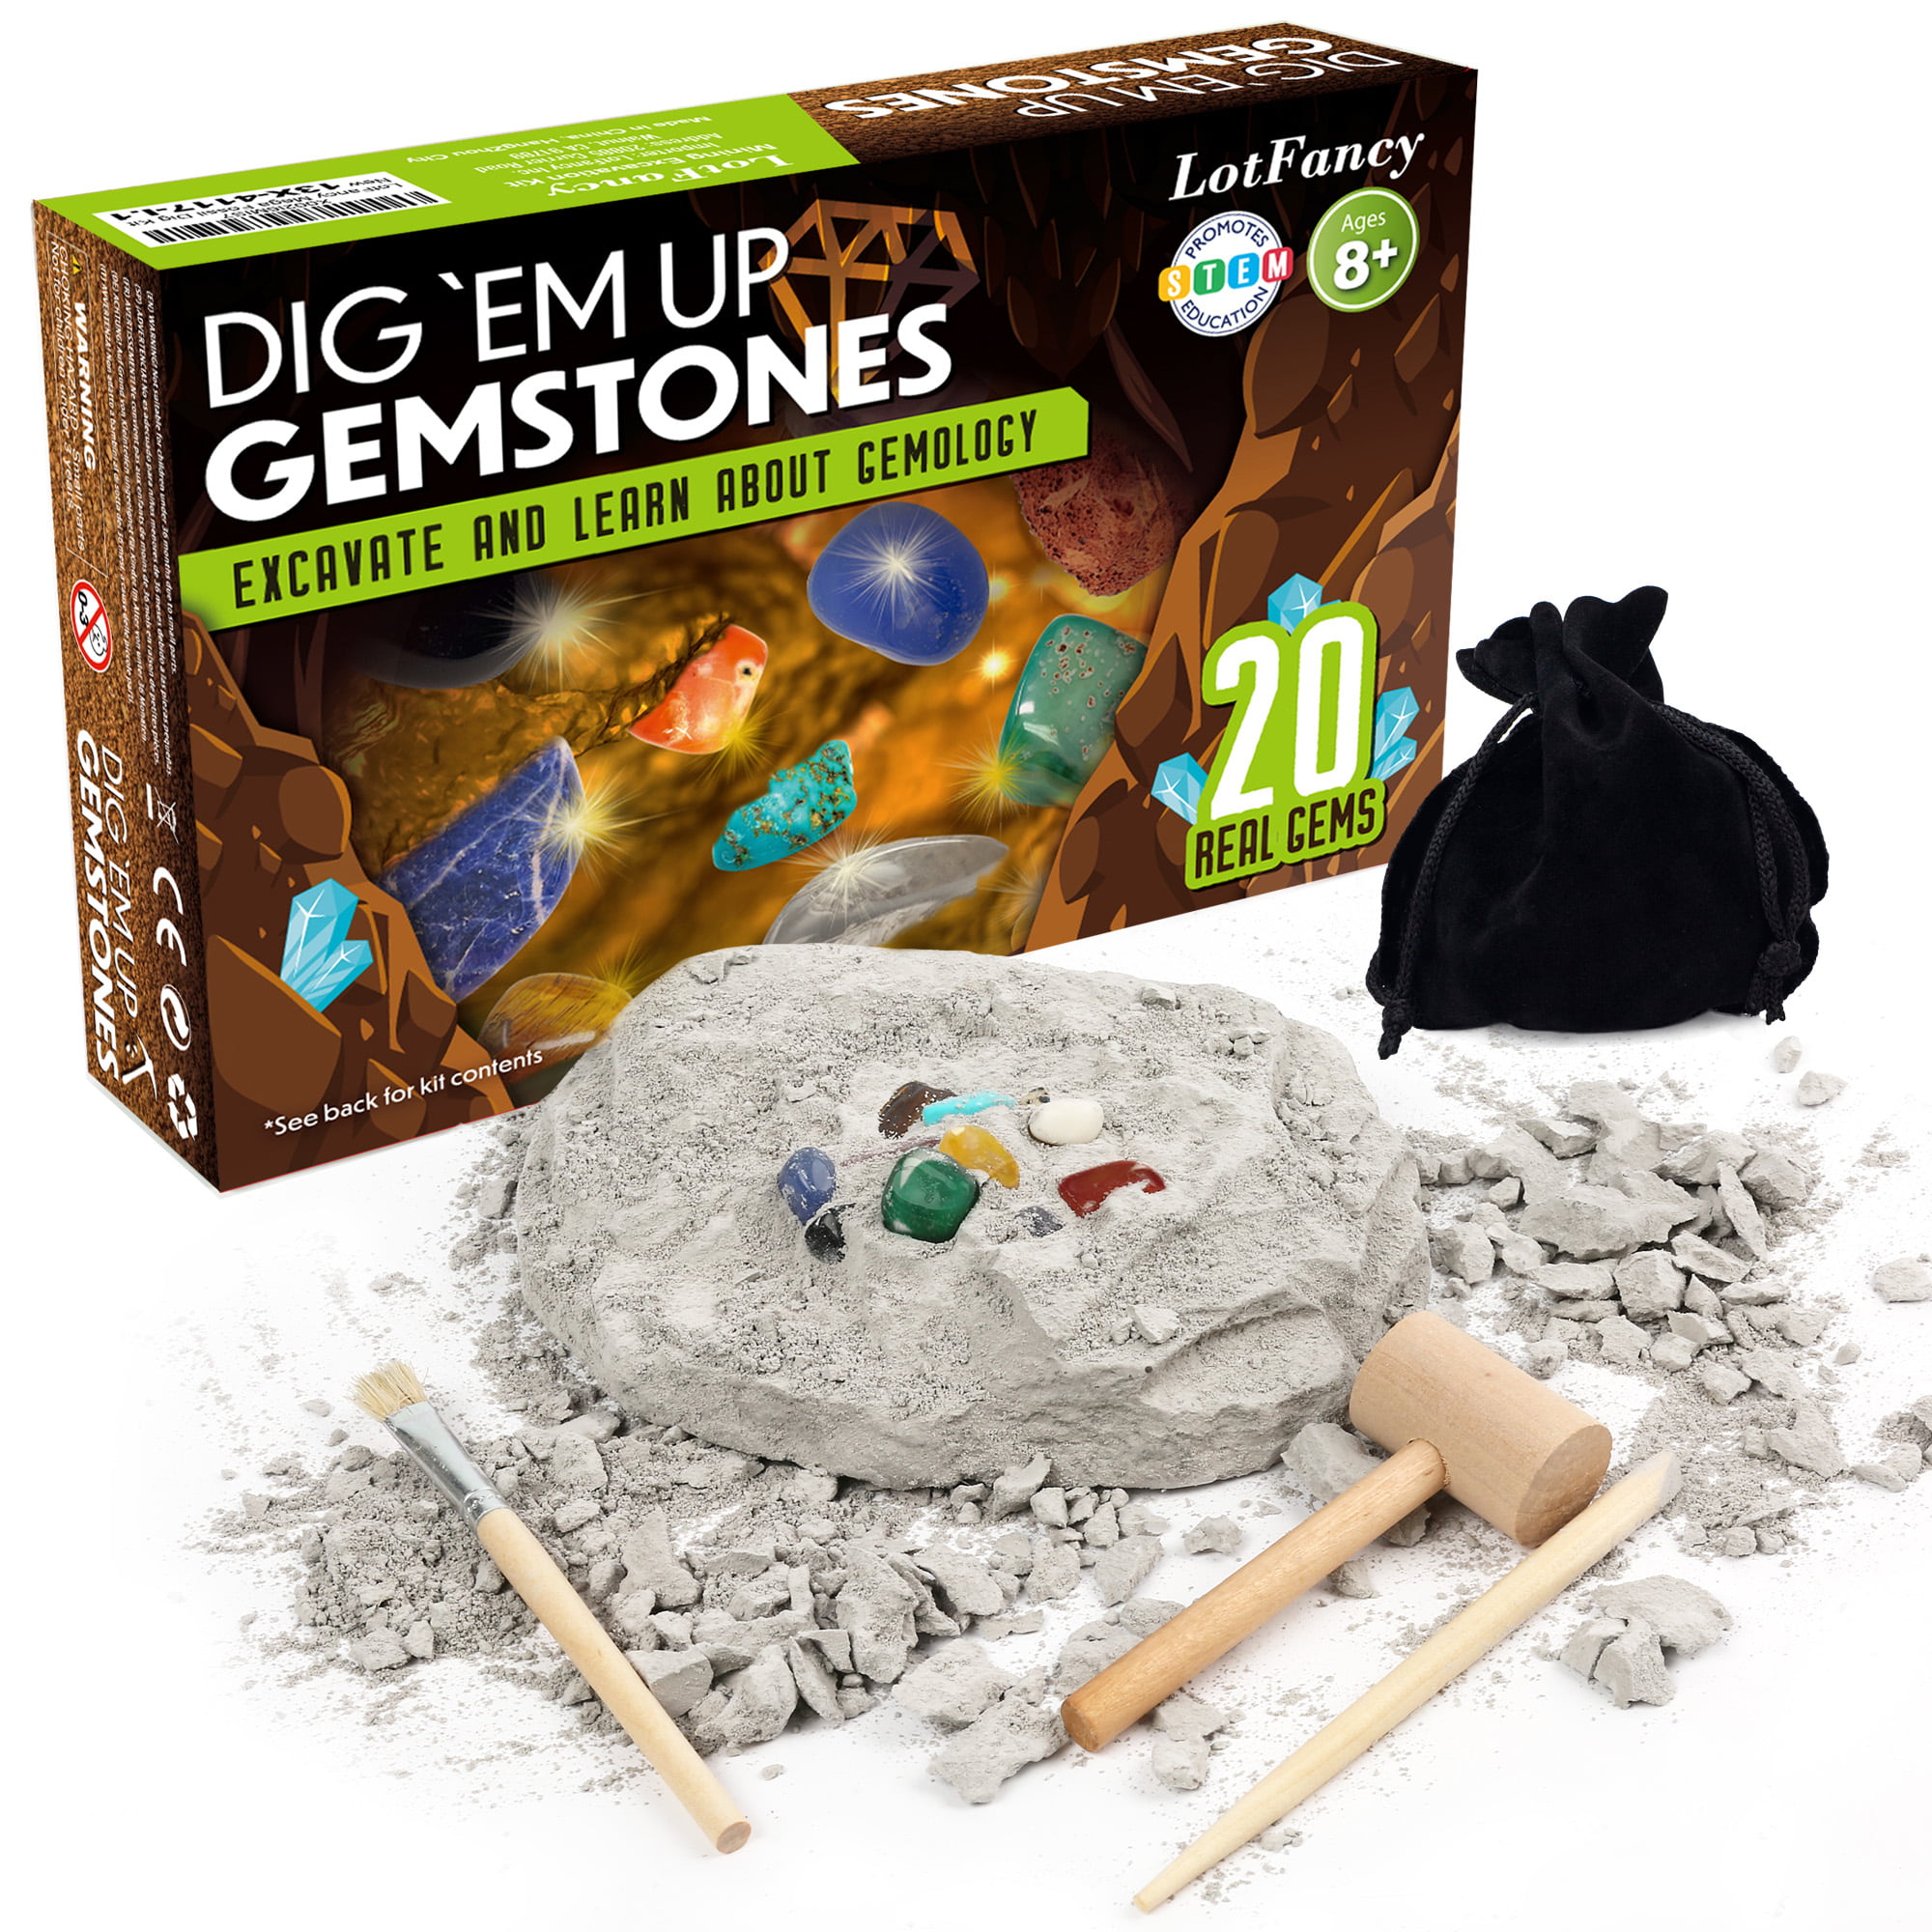 Toysmith Science Experiment Kit 4M Crystal Mining for sale online 